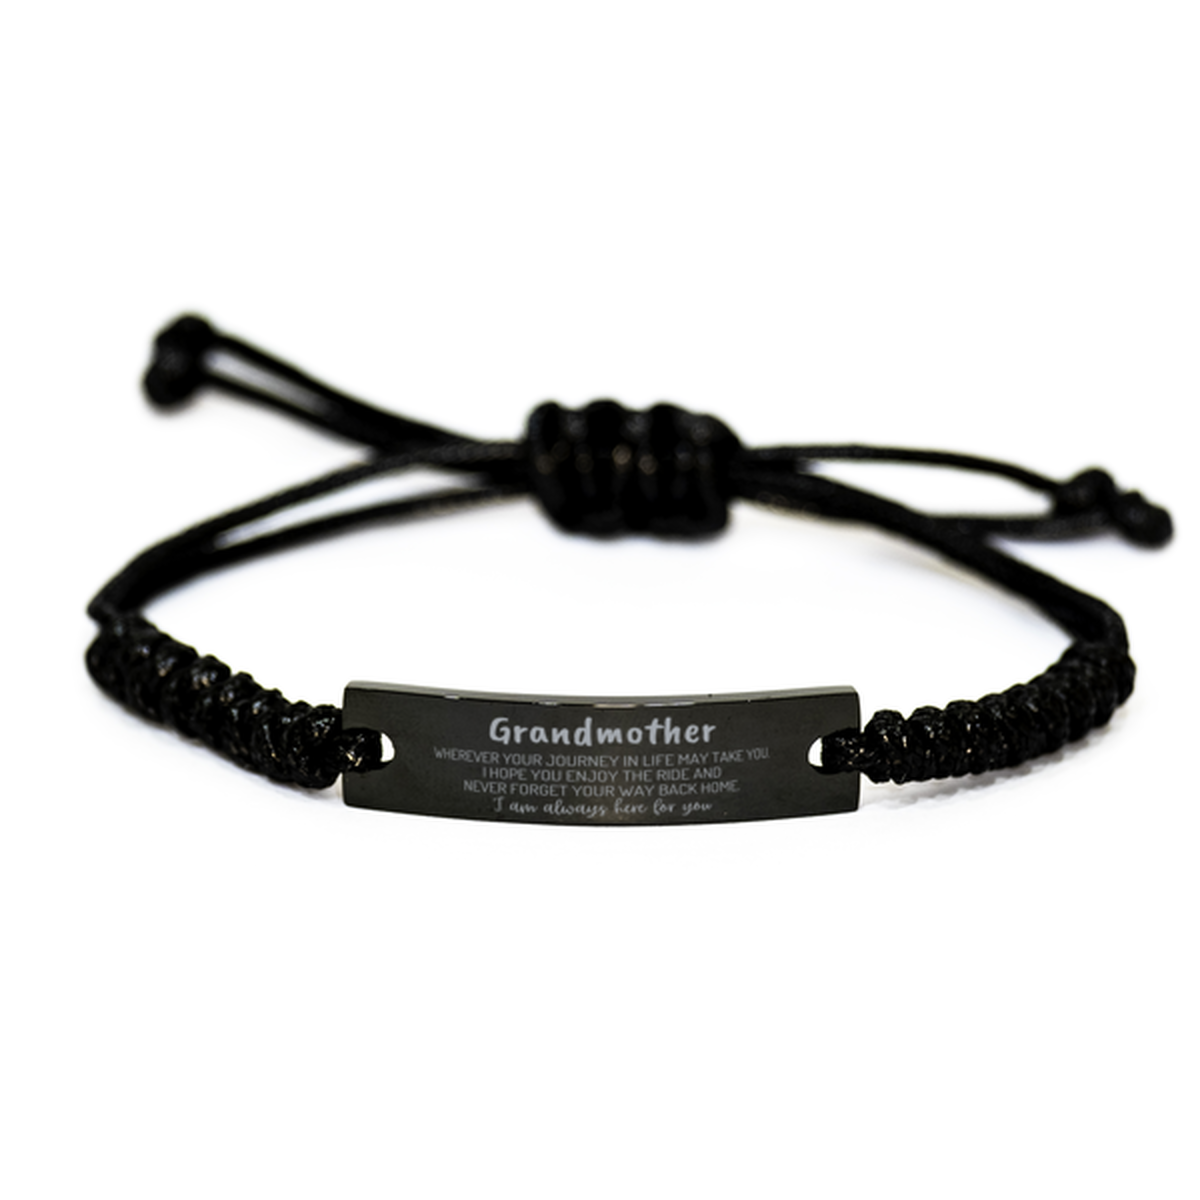 Grandmother wherever your journey in life may take you, I am always here for you Grandmother Black Rope Bracelet, Awesome Christmas Gifts For Grandmother, Grandmother Birthday Gifts for Men Women Family Loved One